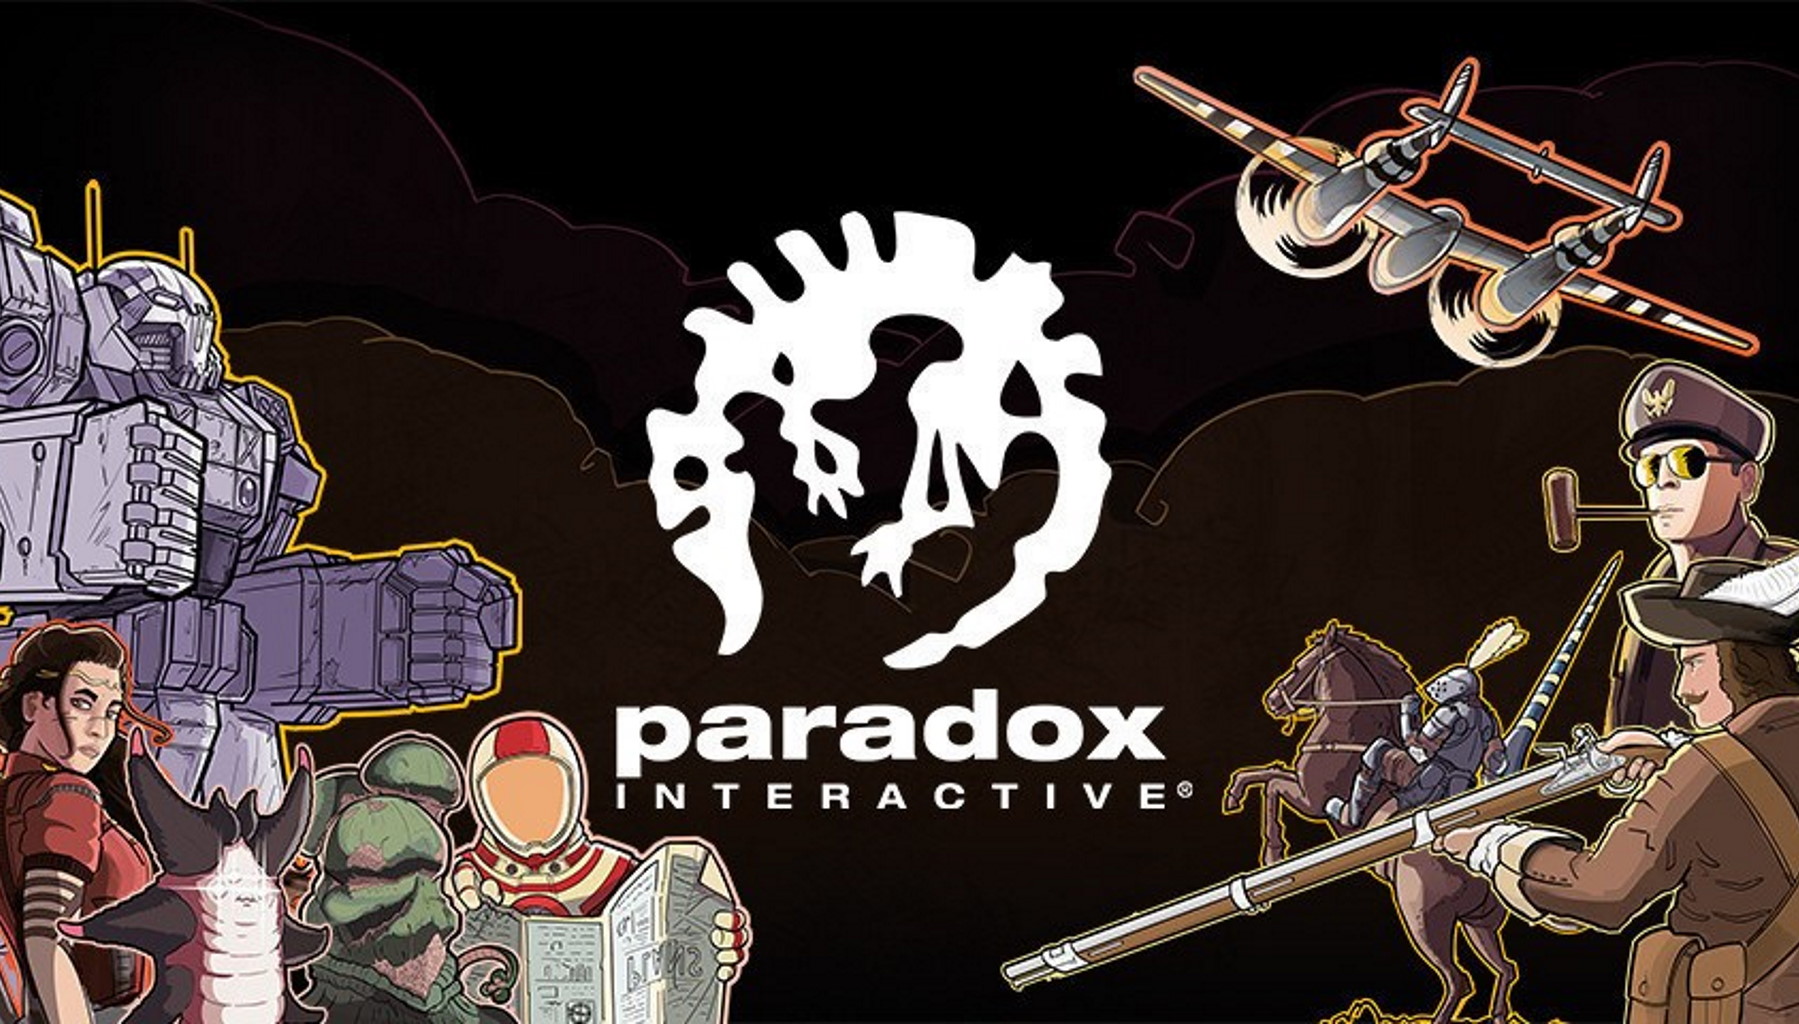  'It's hard to be a woman in this company': More details of sexual harassment at Paradox Interactive emerge 